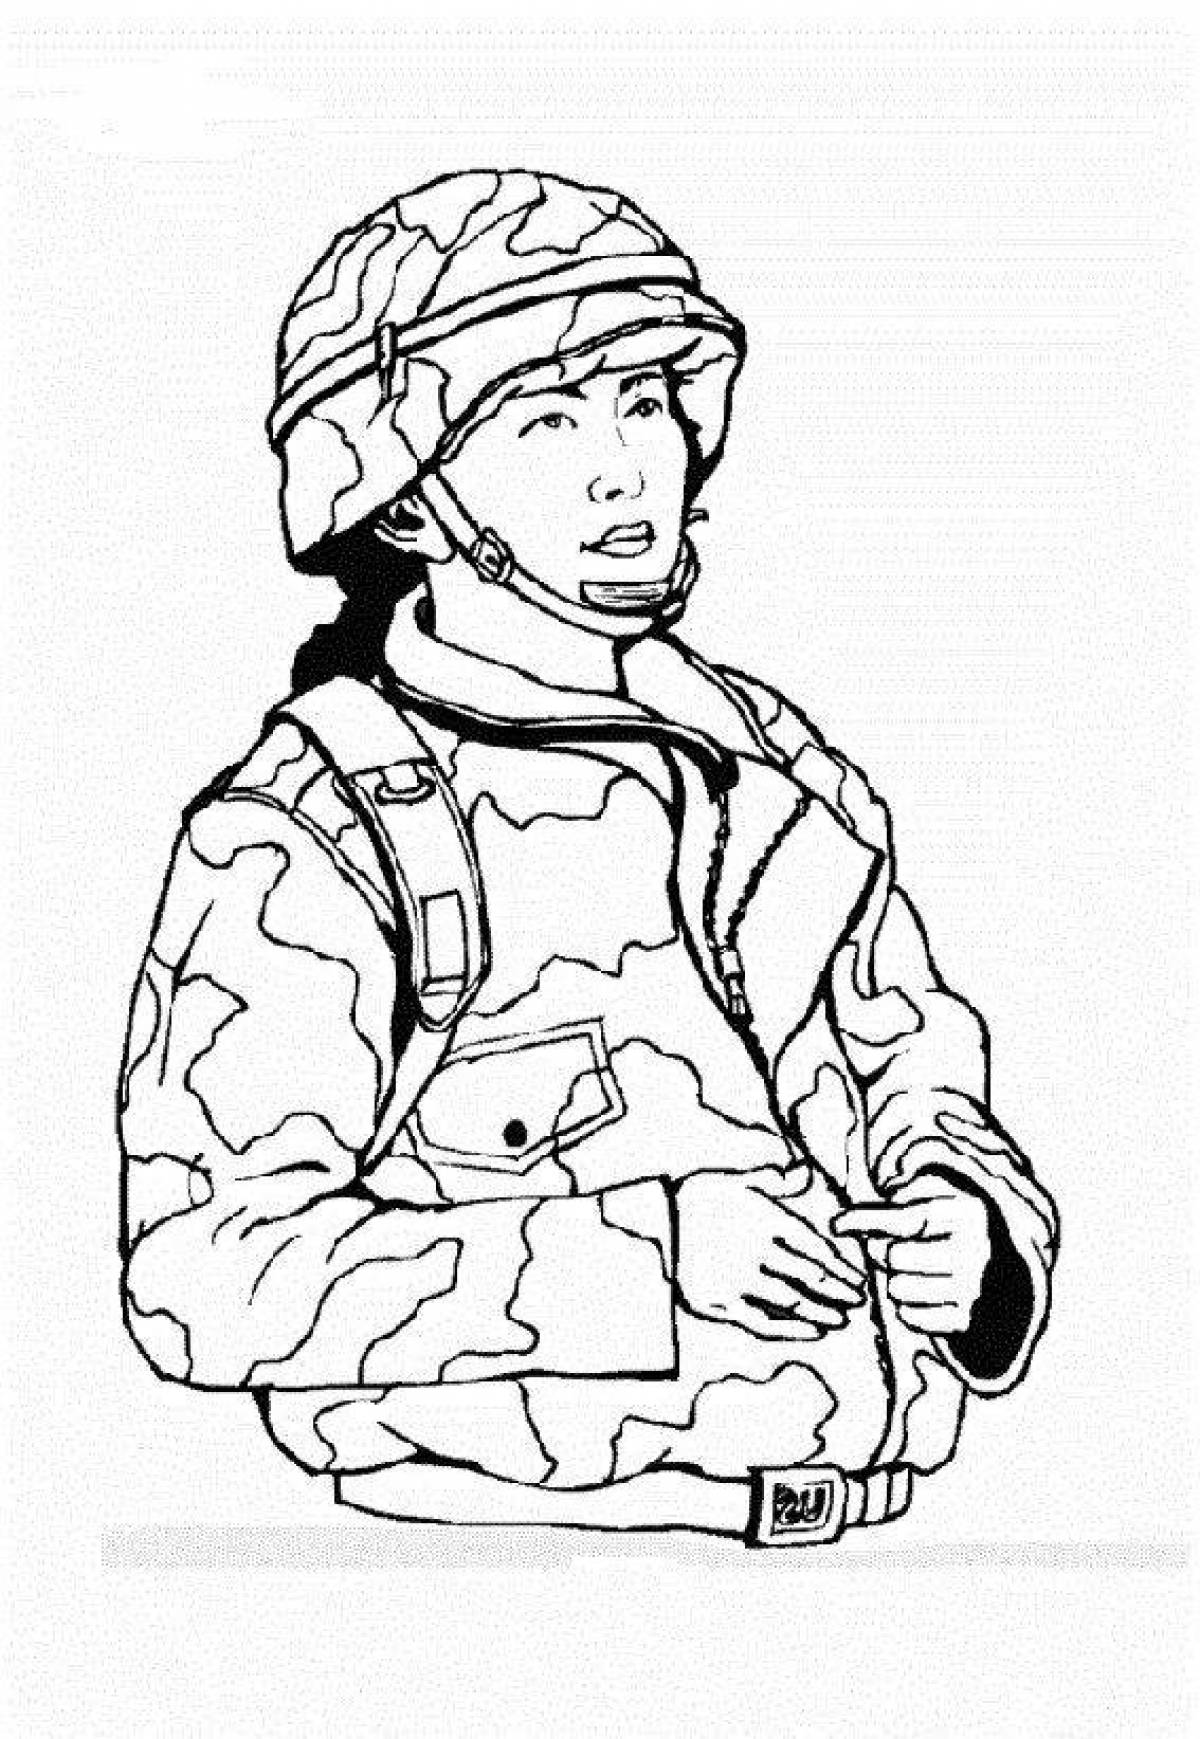 Exquisite soldier coloring page 23 February